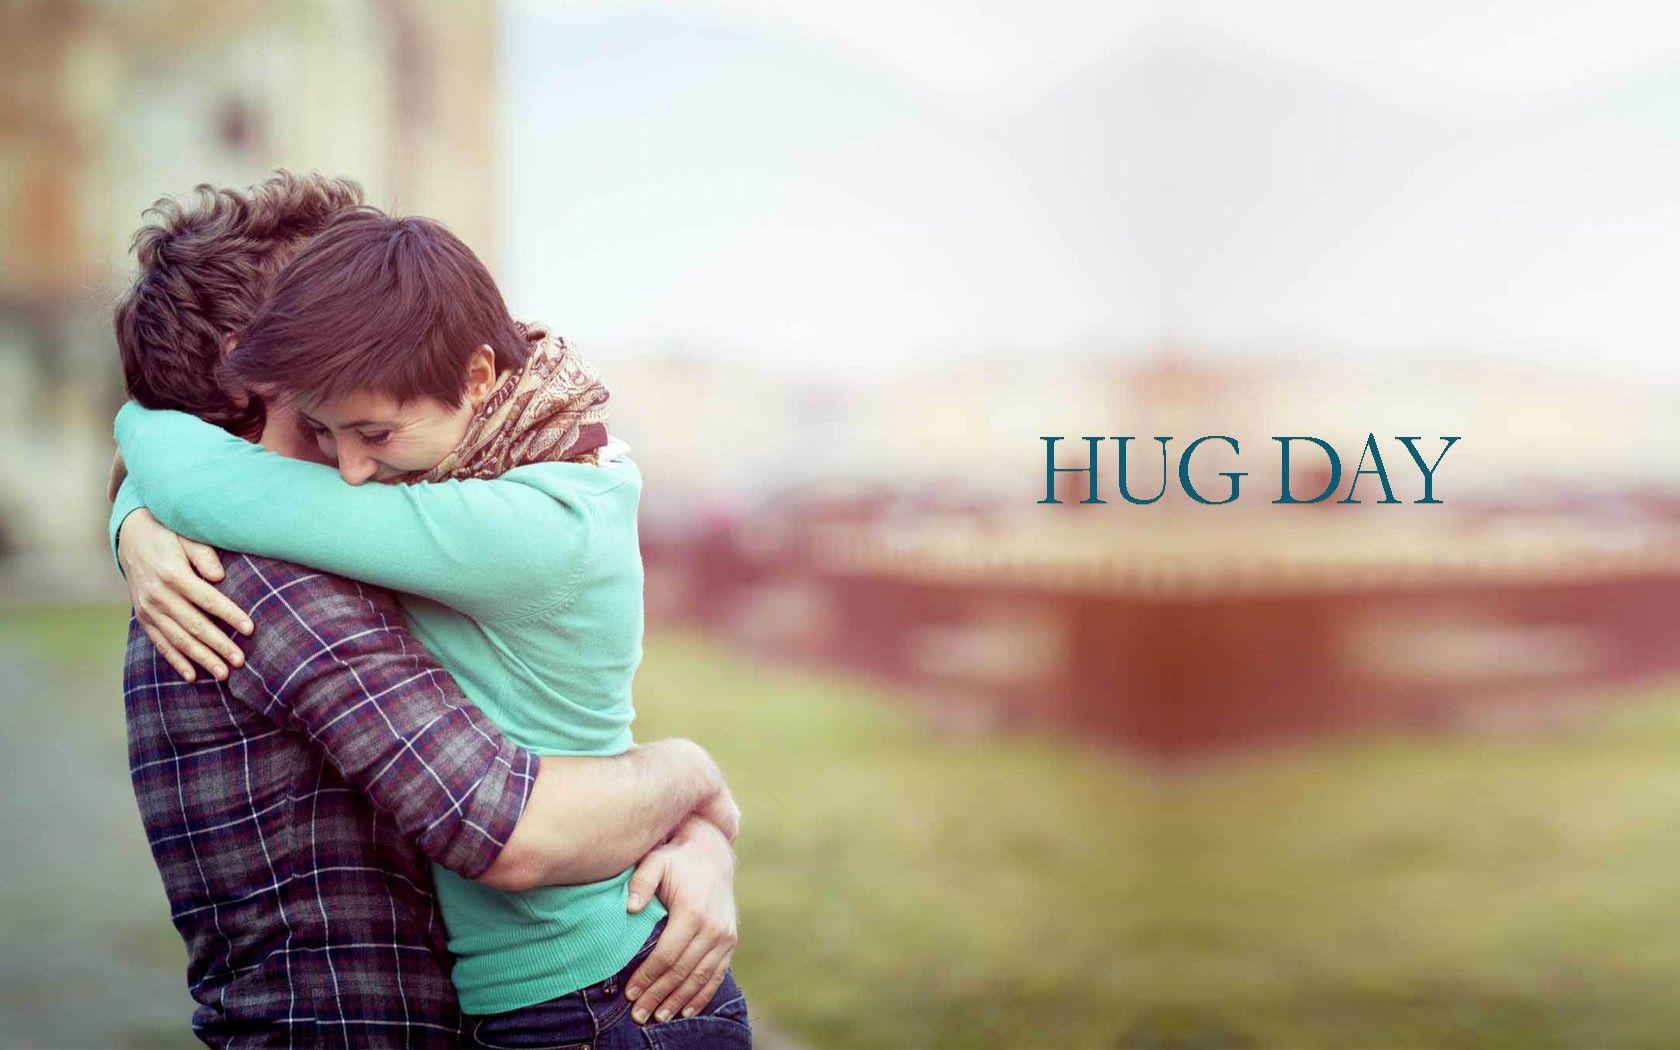 hugs or love picture image photo